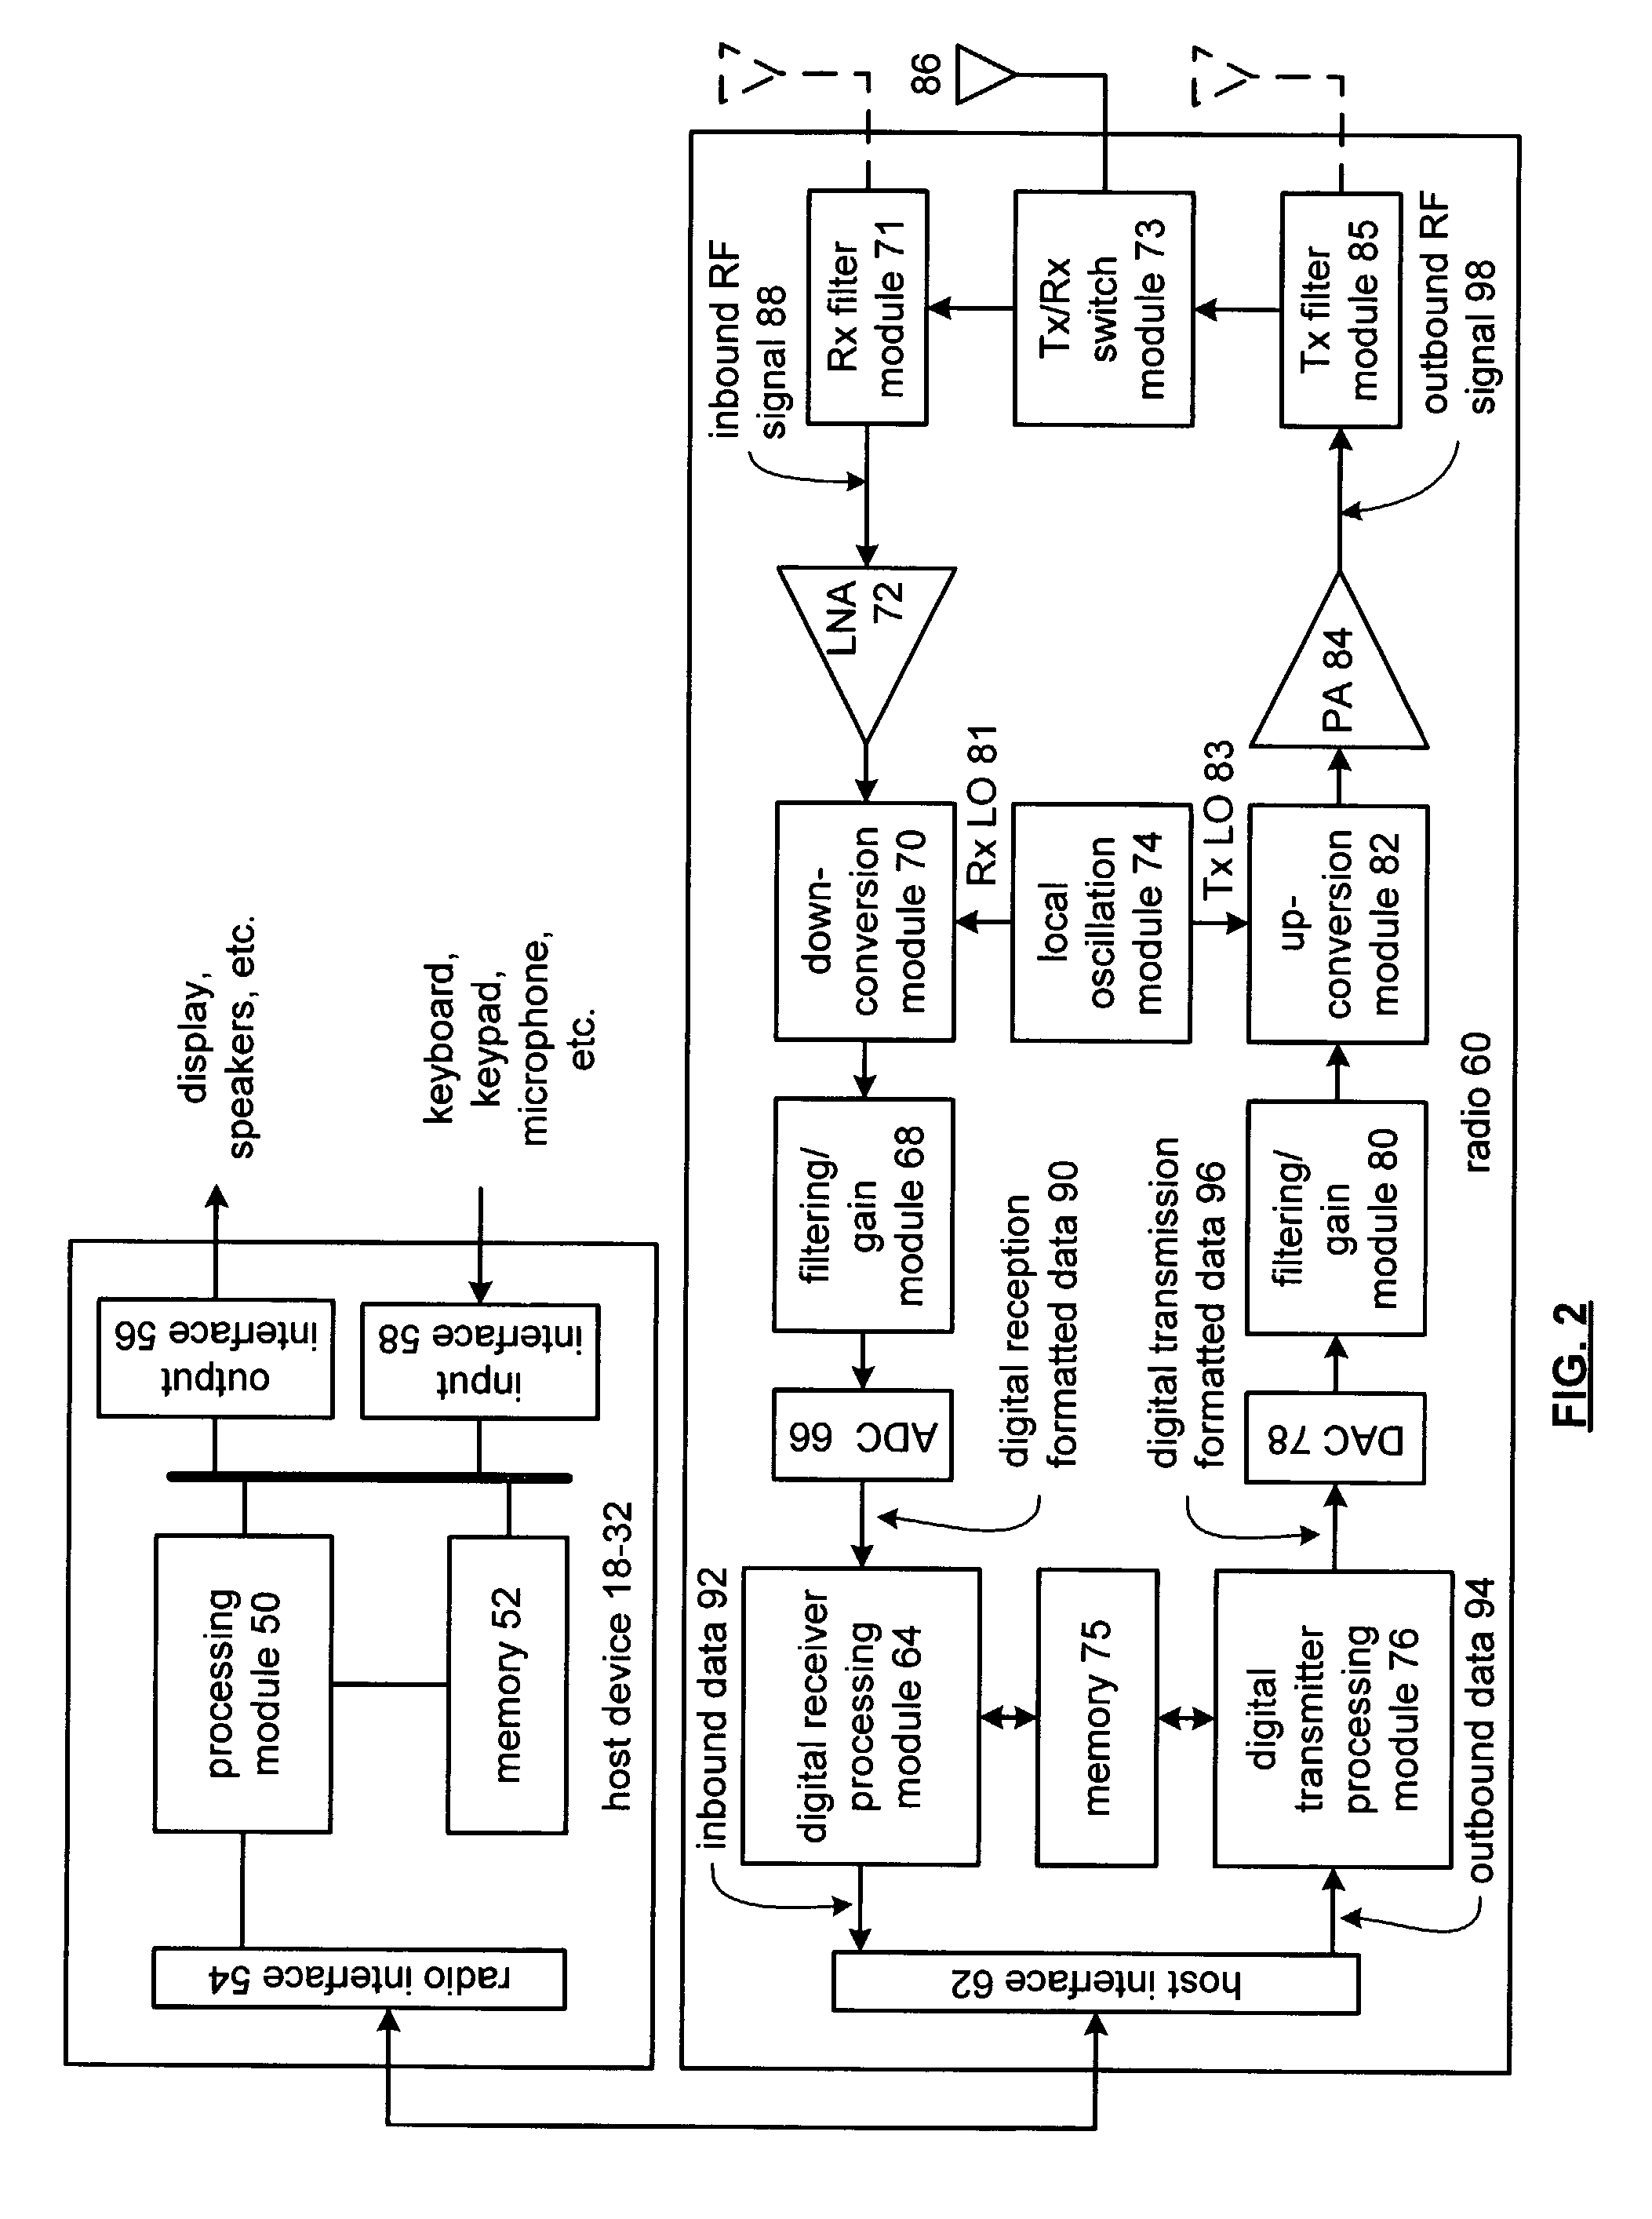 Trimming of local oscillation in an integrated circuit radio